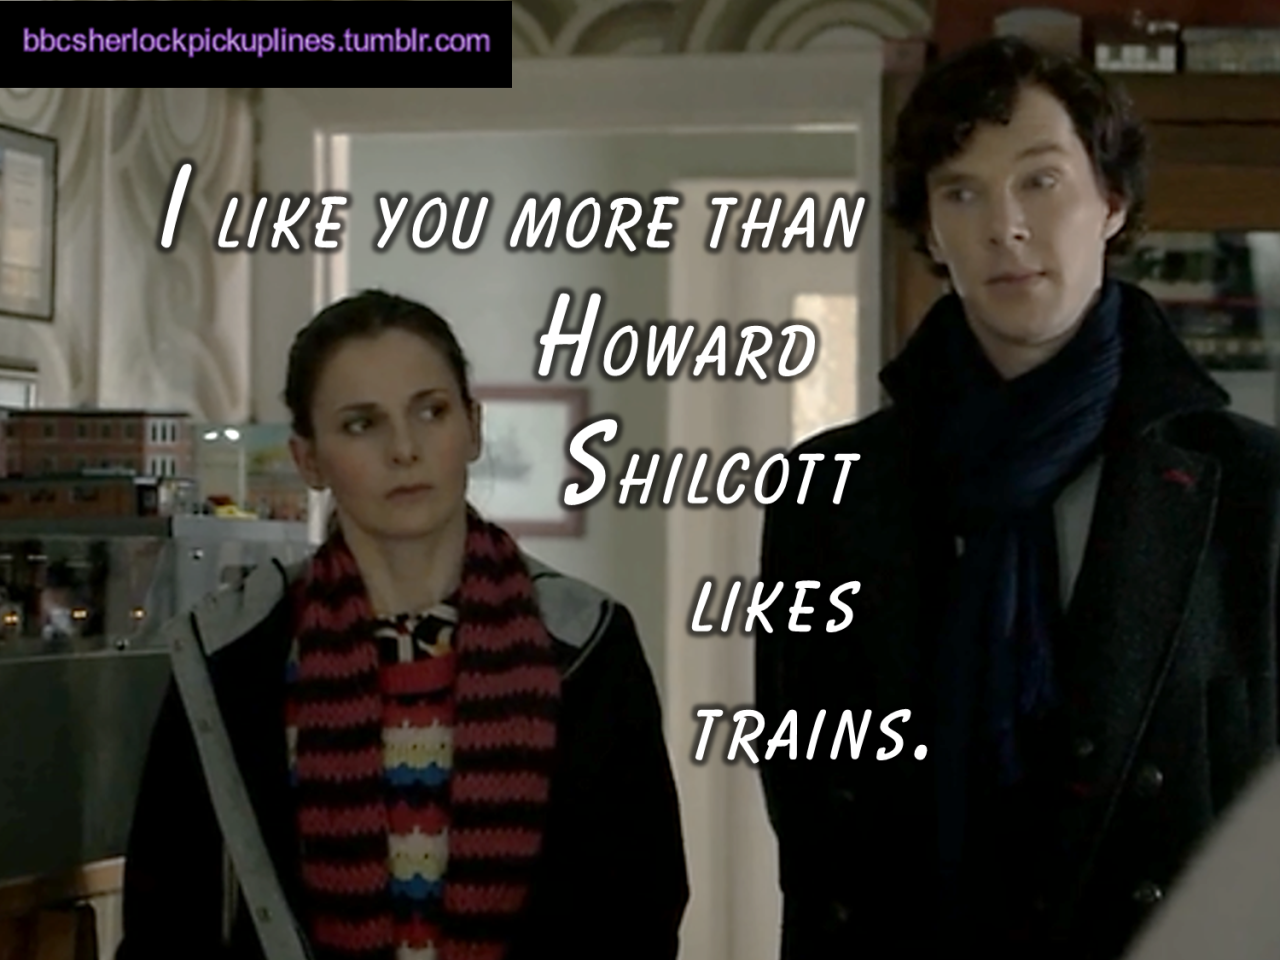 The best of The Empty Hearse, from BBC Sherlock pick-up lines.